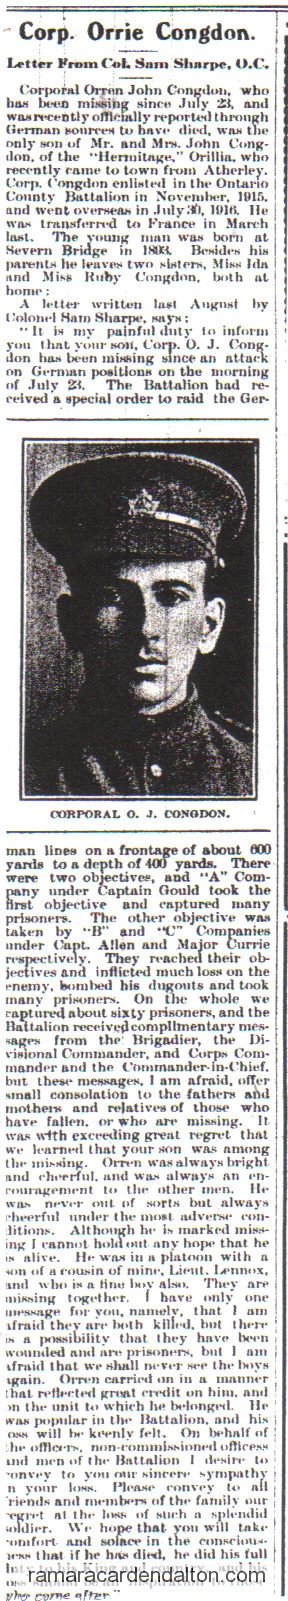 Congdon- letter from Colonel